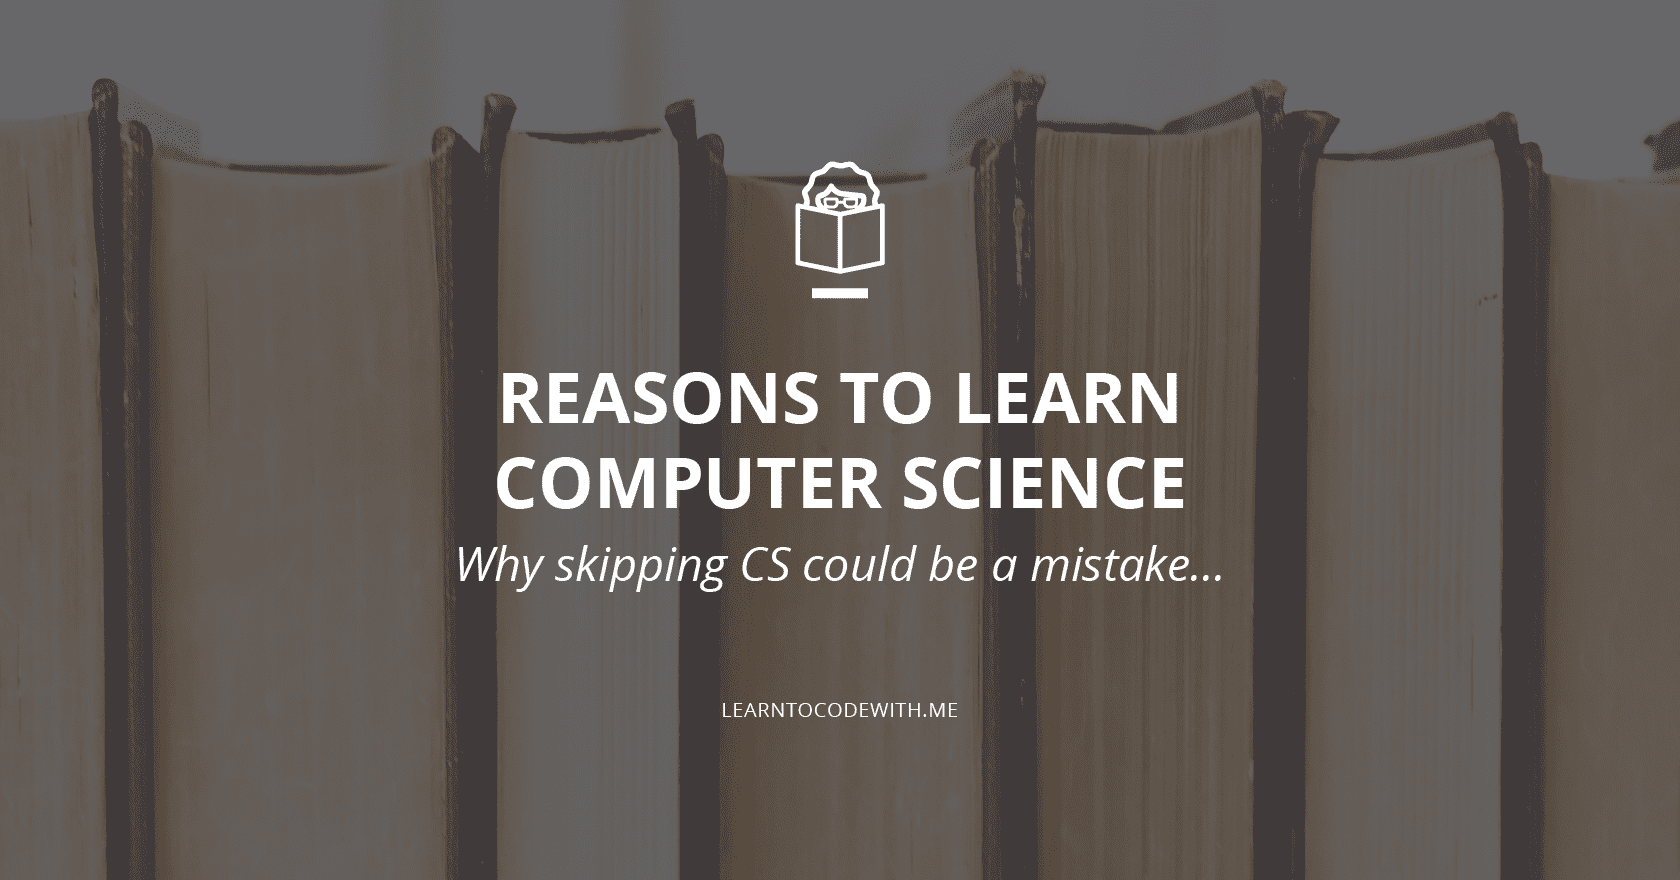 Why Learn Computer Science